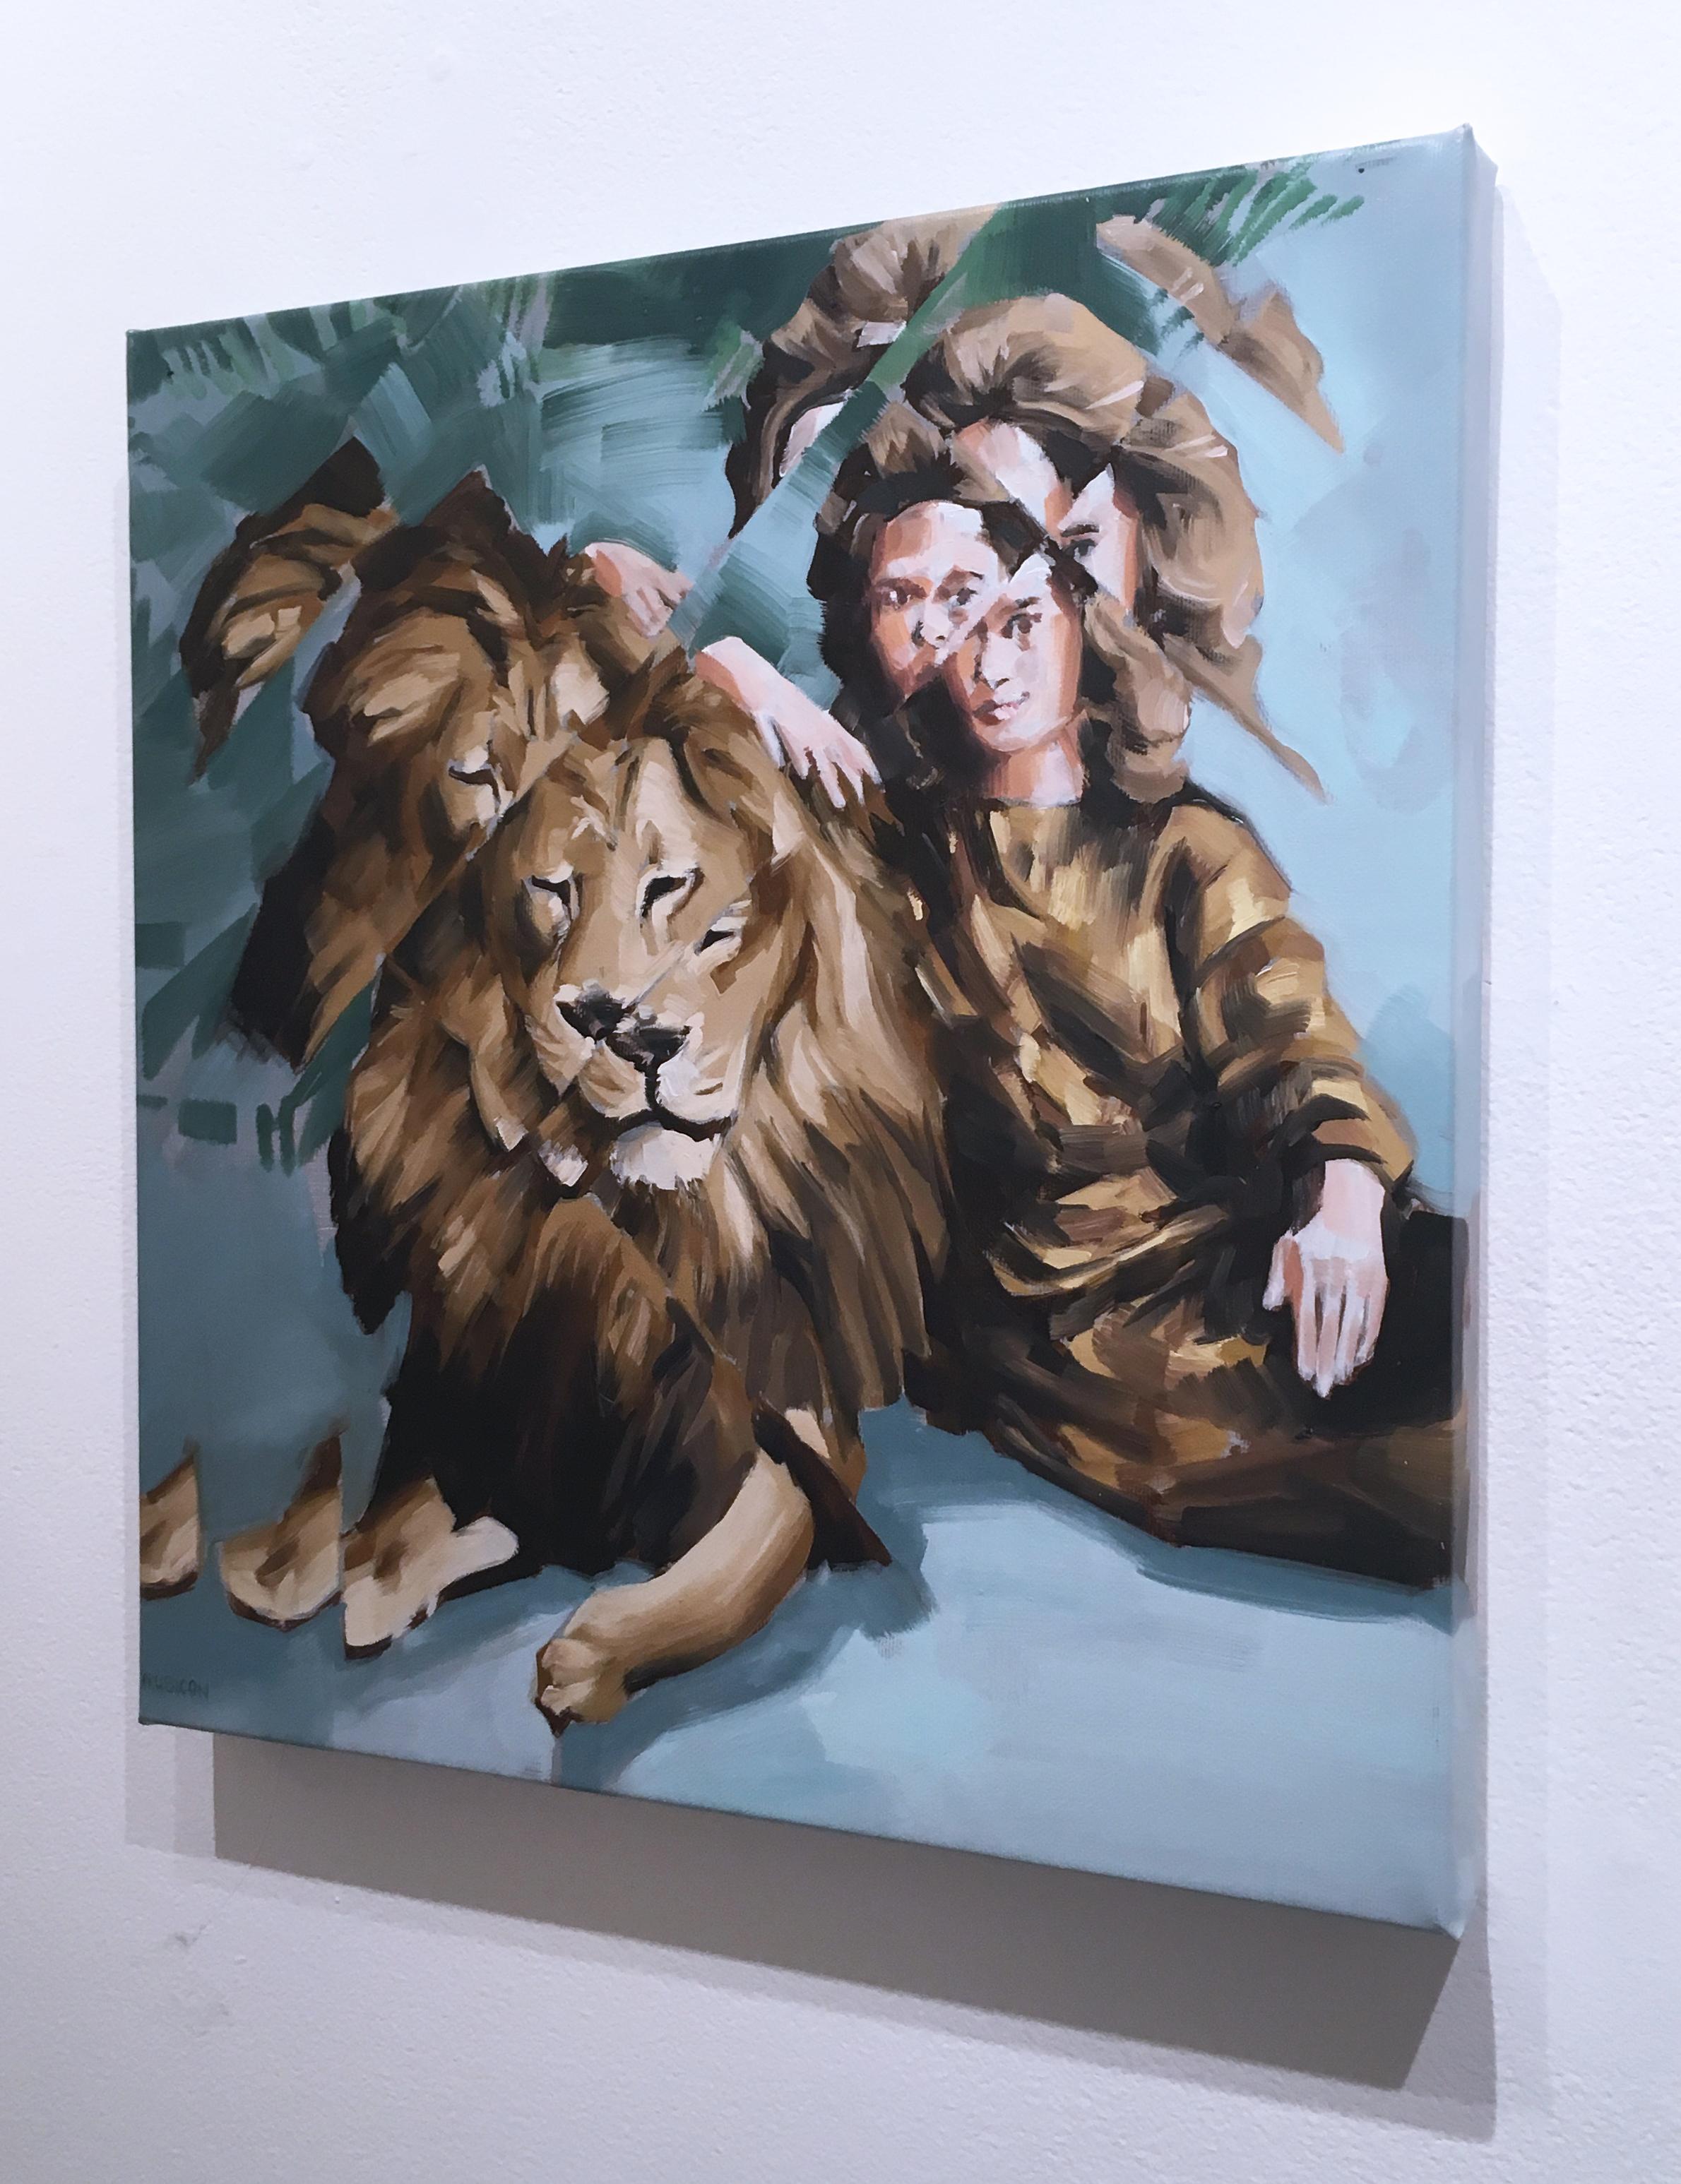 Tippi and Neil by RU8ICON1
Portrait of Tippi Hedren and her lion Neil by Barcelona based contemporary street artist and formally trained painter, RU8ICON1.  Figurative oil painting on canvas with distorted portraiture in saturated colors -- golds,